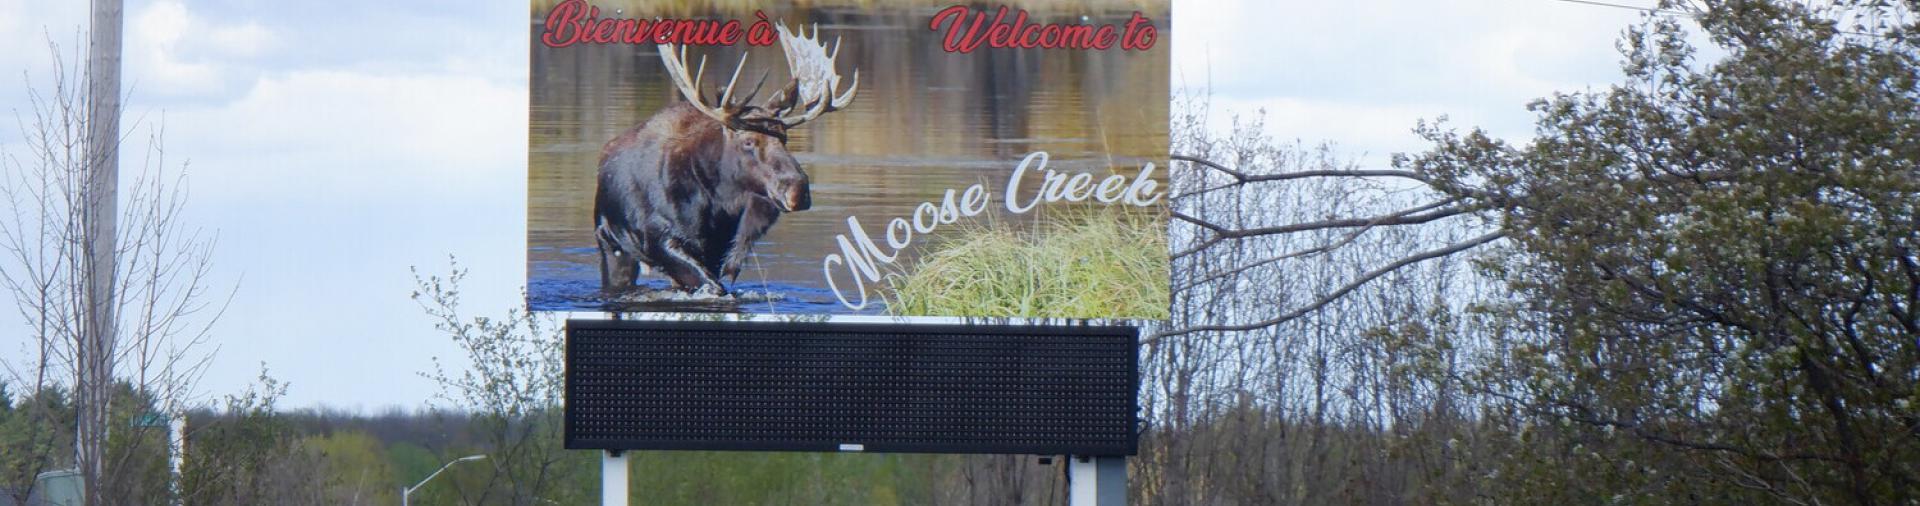 Welcome to Moose Creek sign